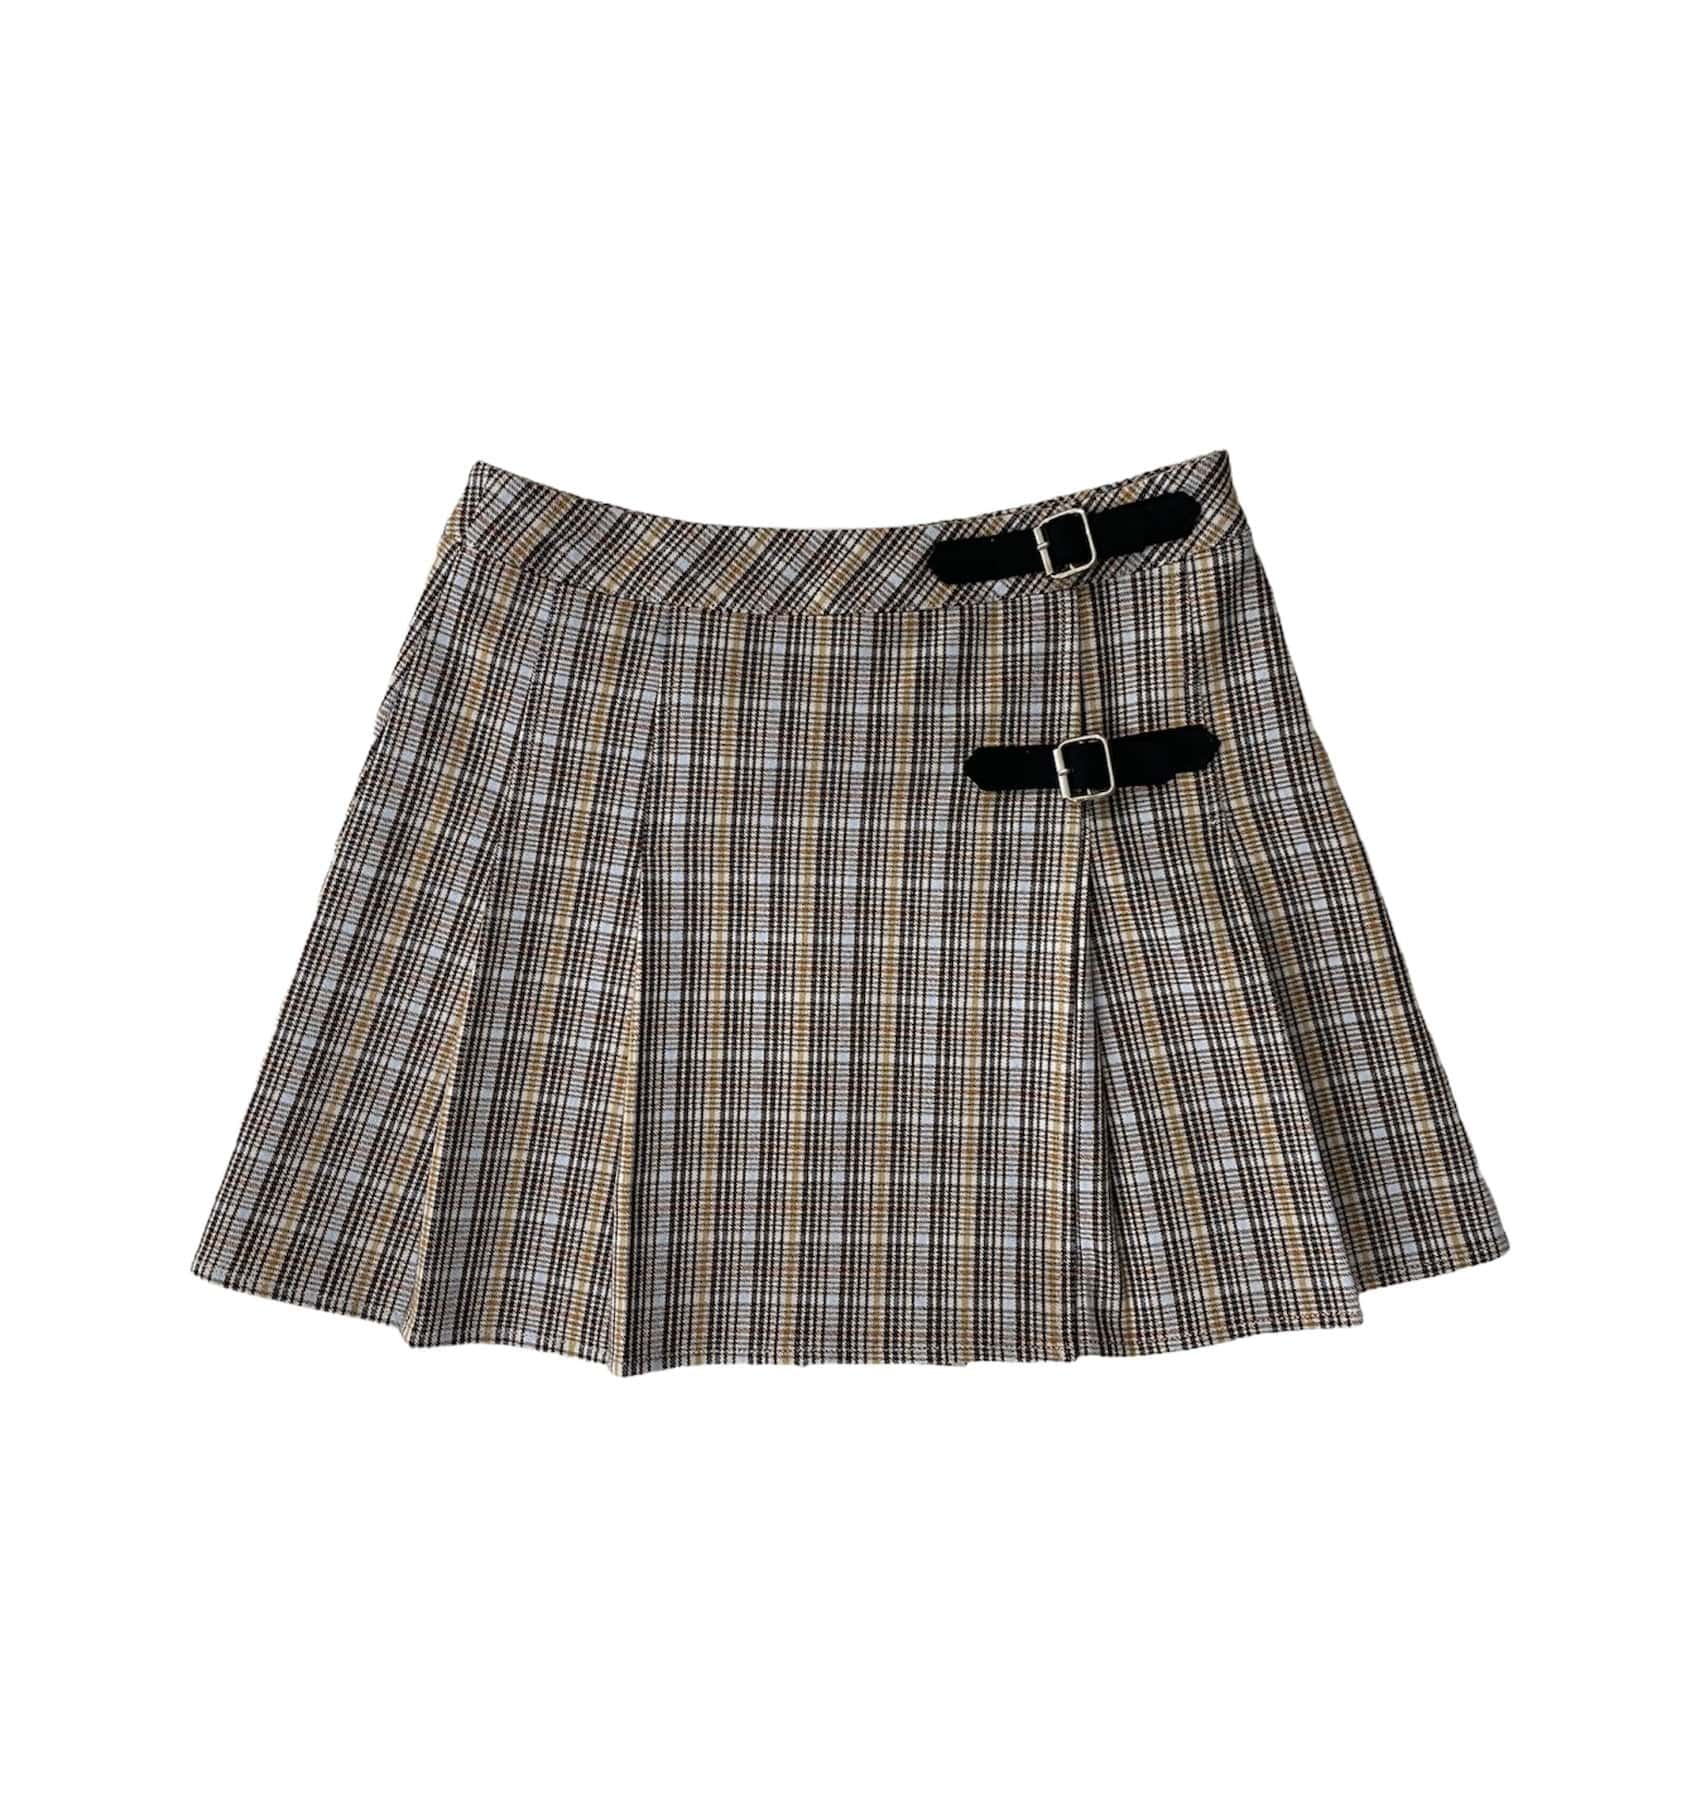 Brittany Skirt - Blue & Taupe Plaid - Twinkle Twinkle Little One